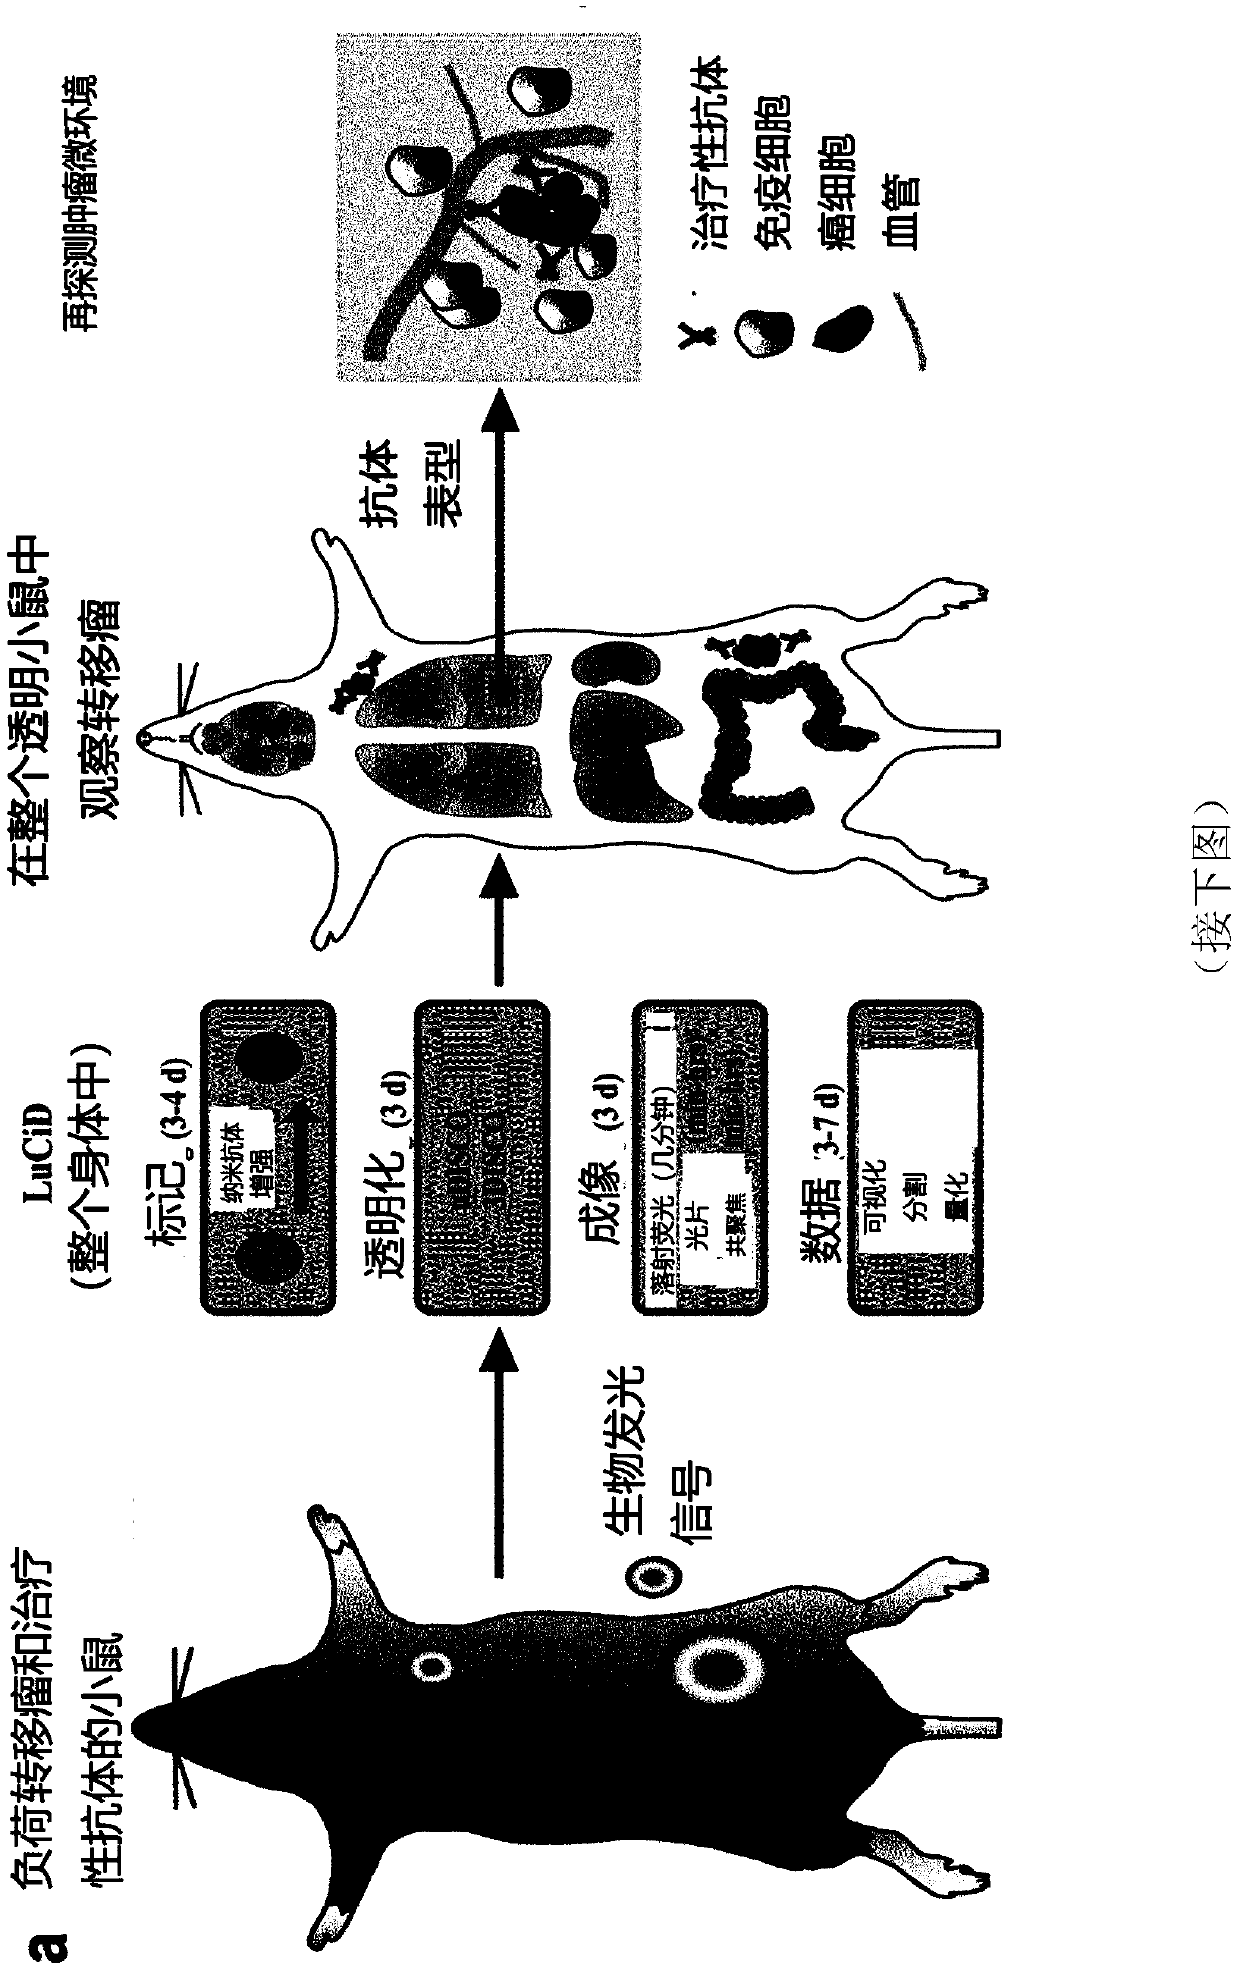 Methods for large tissue labeling, clearing and imaging